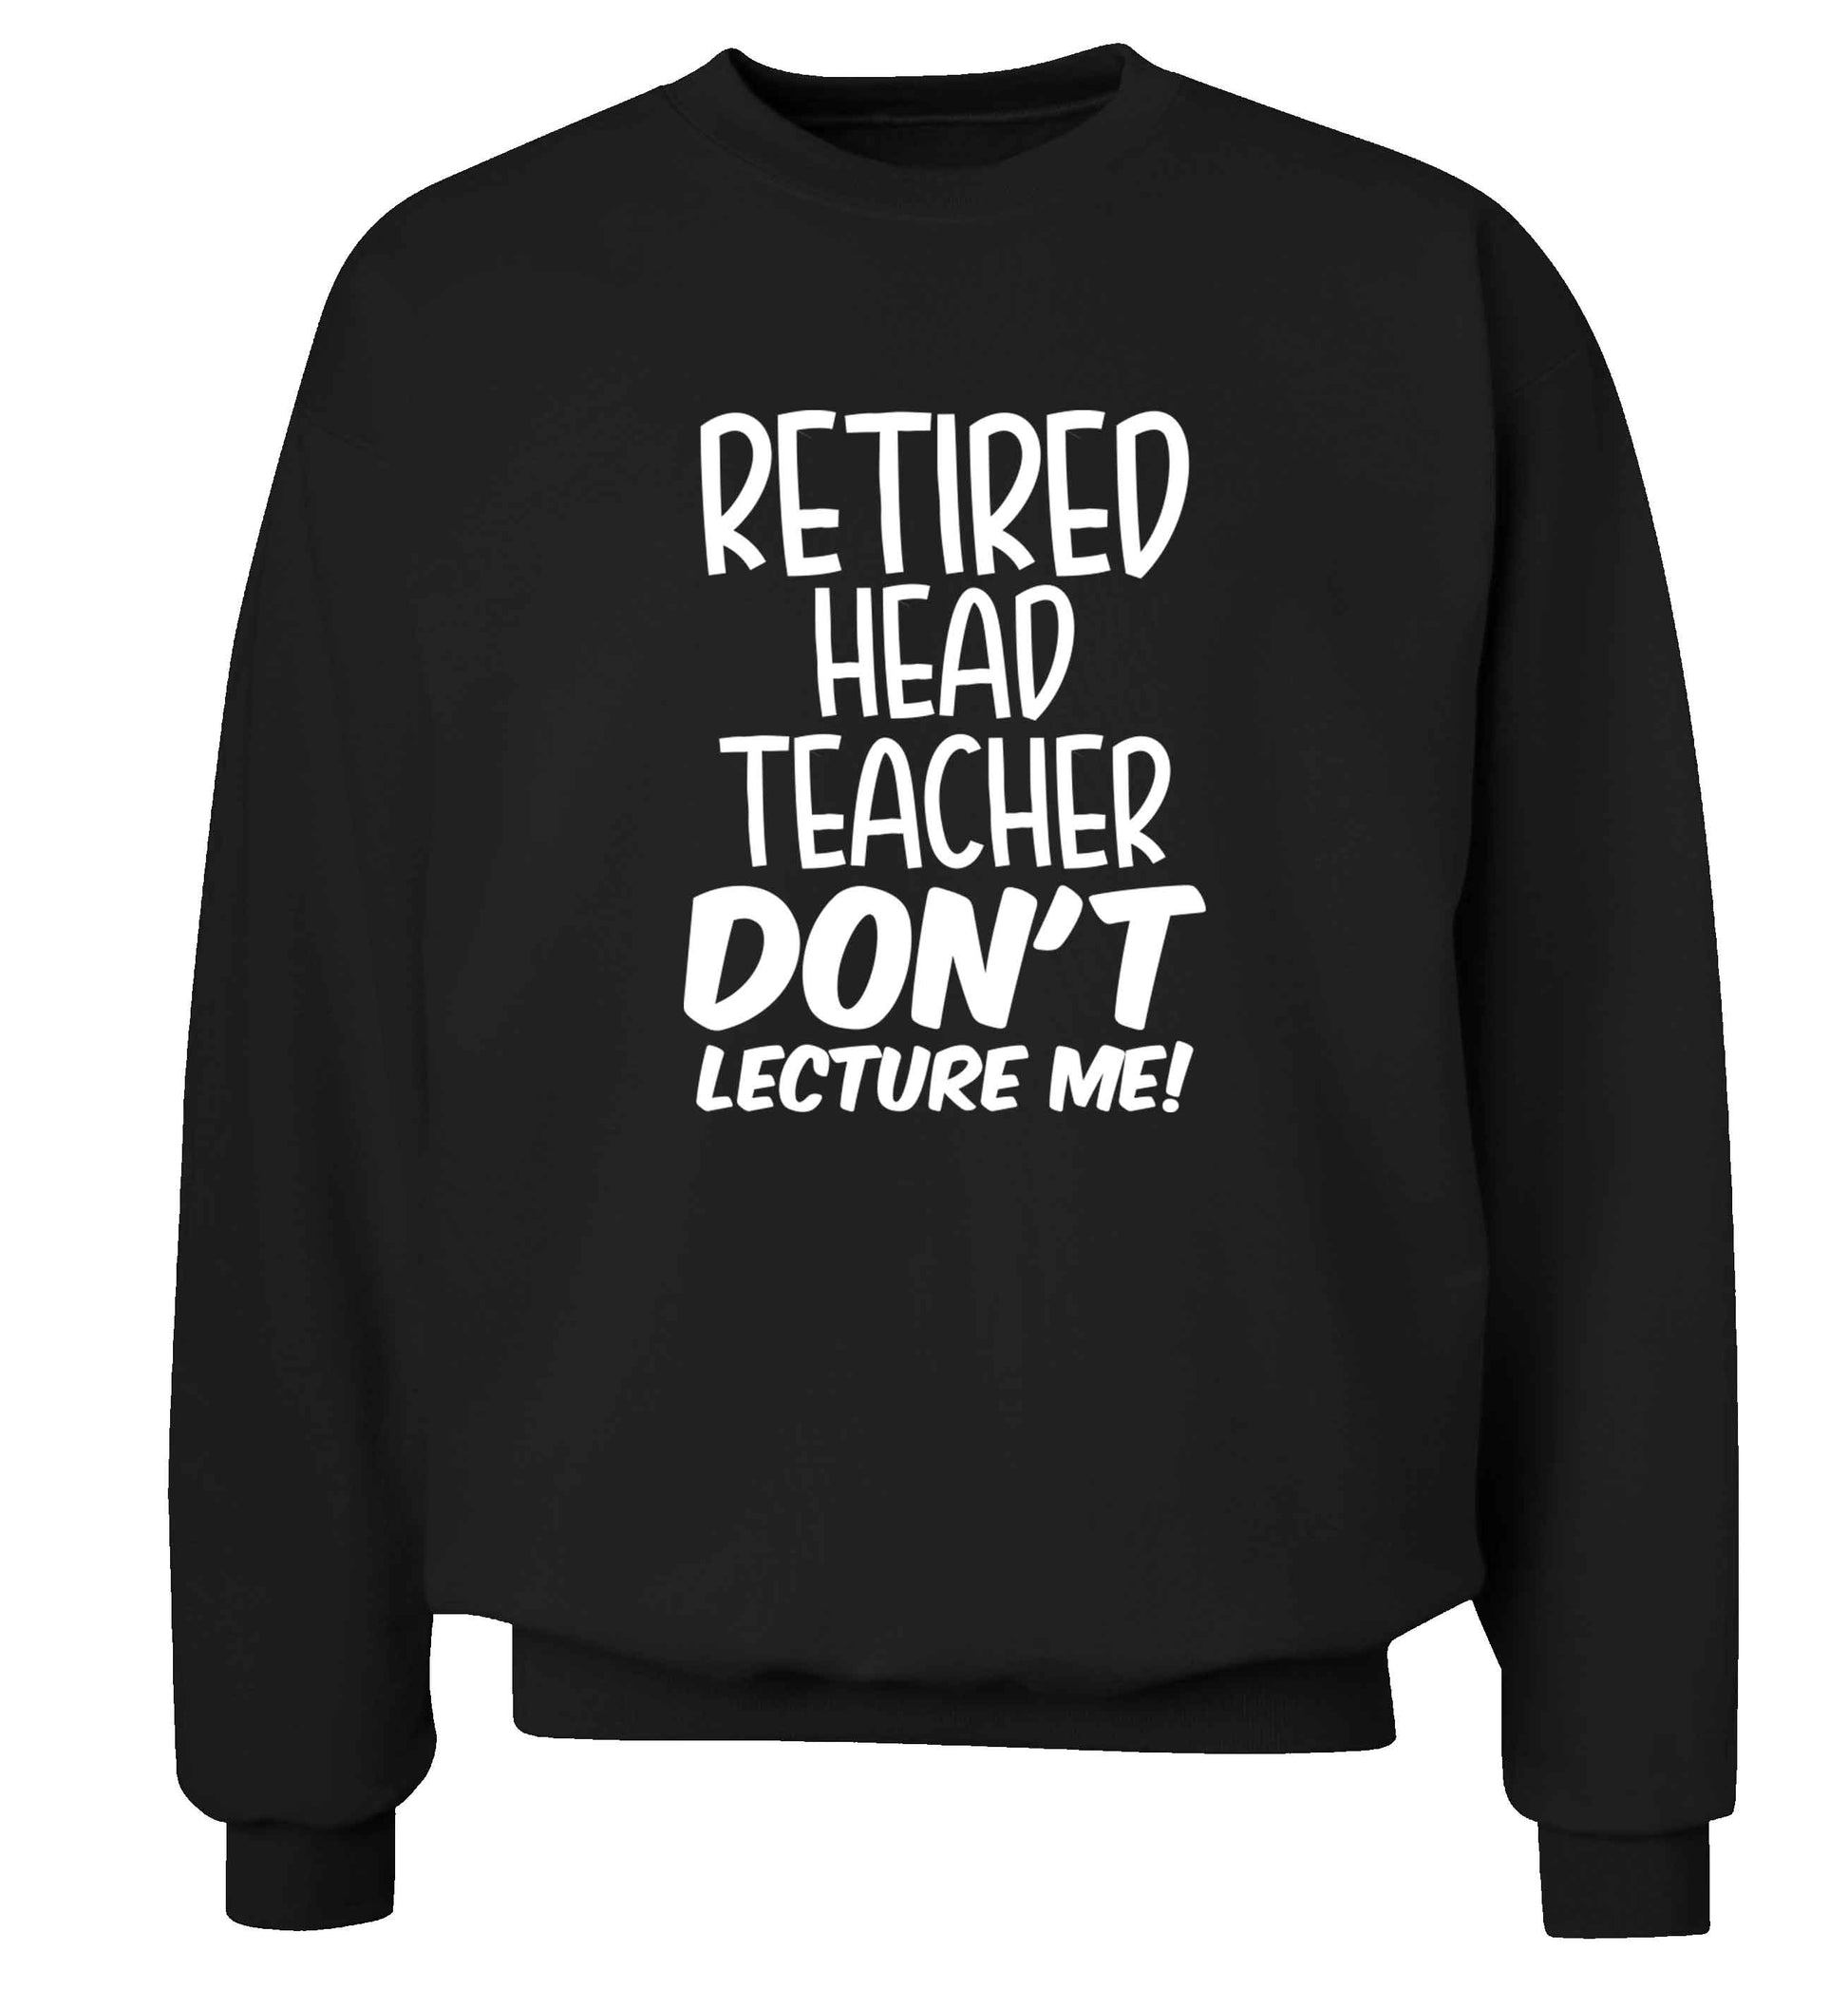 Retired head teacher don't lecture me! Adult's unisex black Sweater 2XL